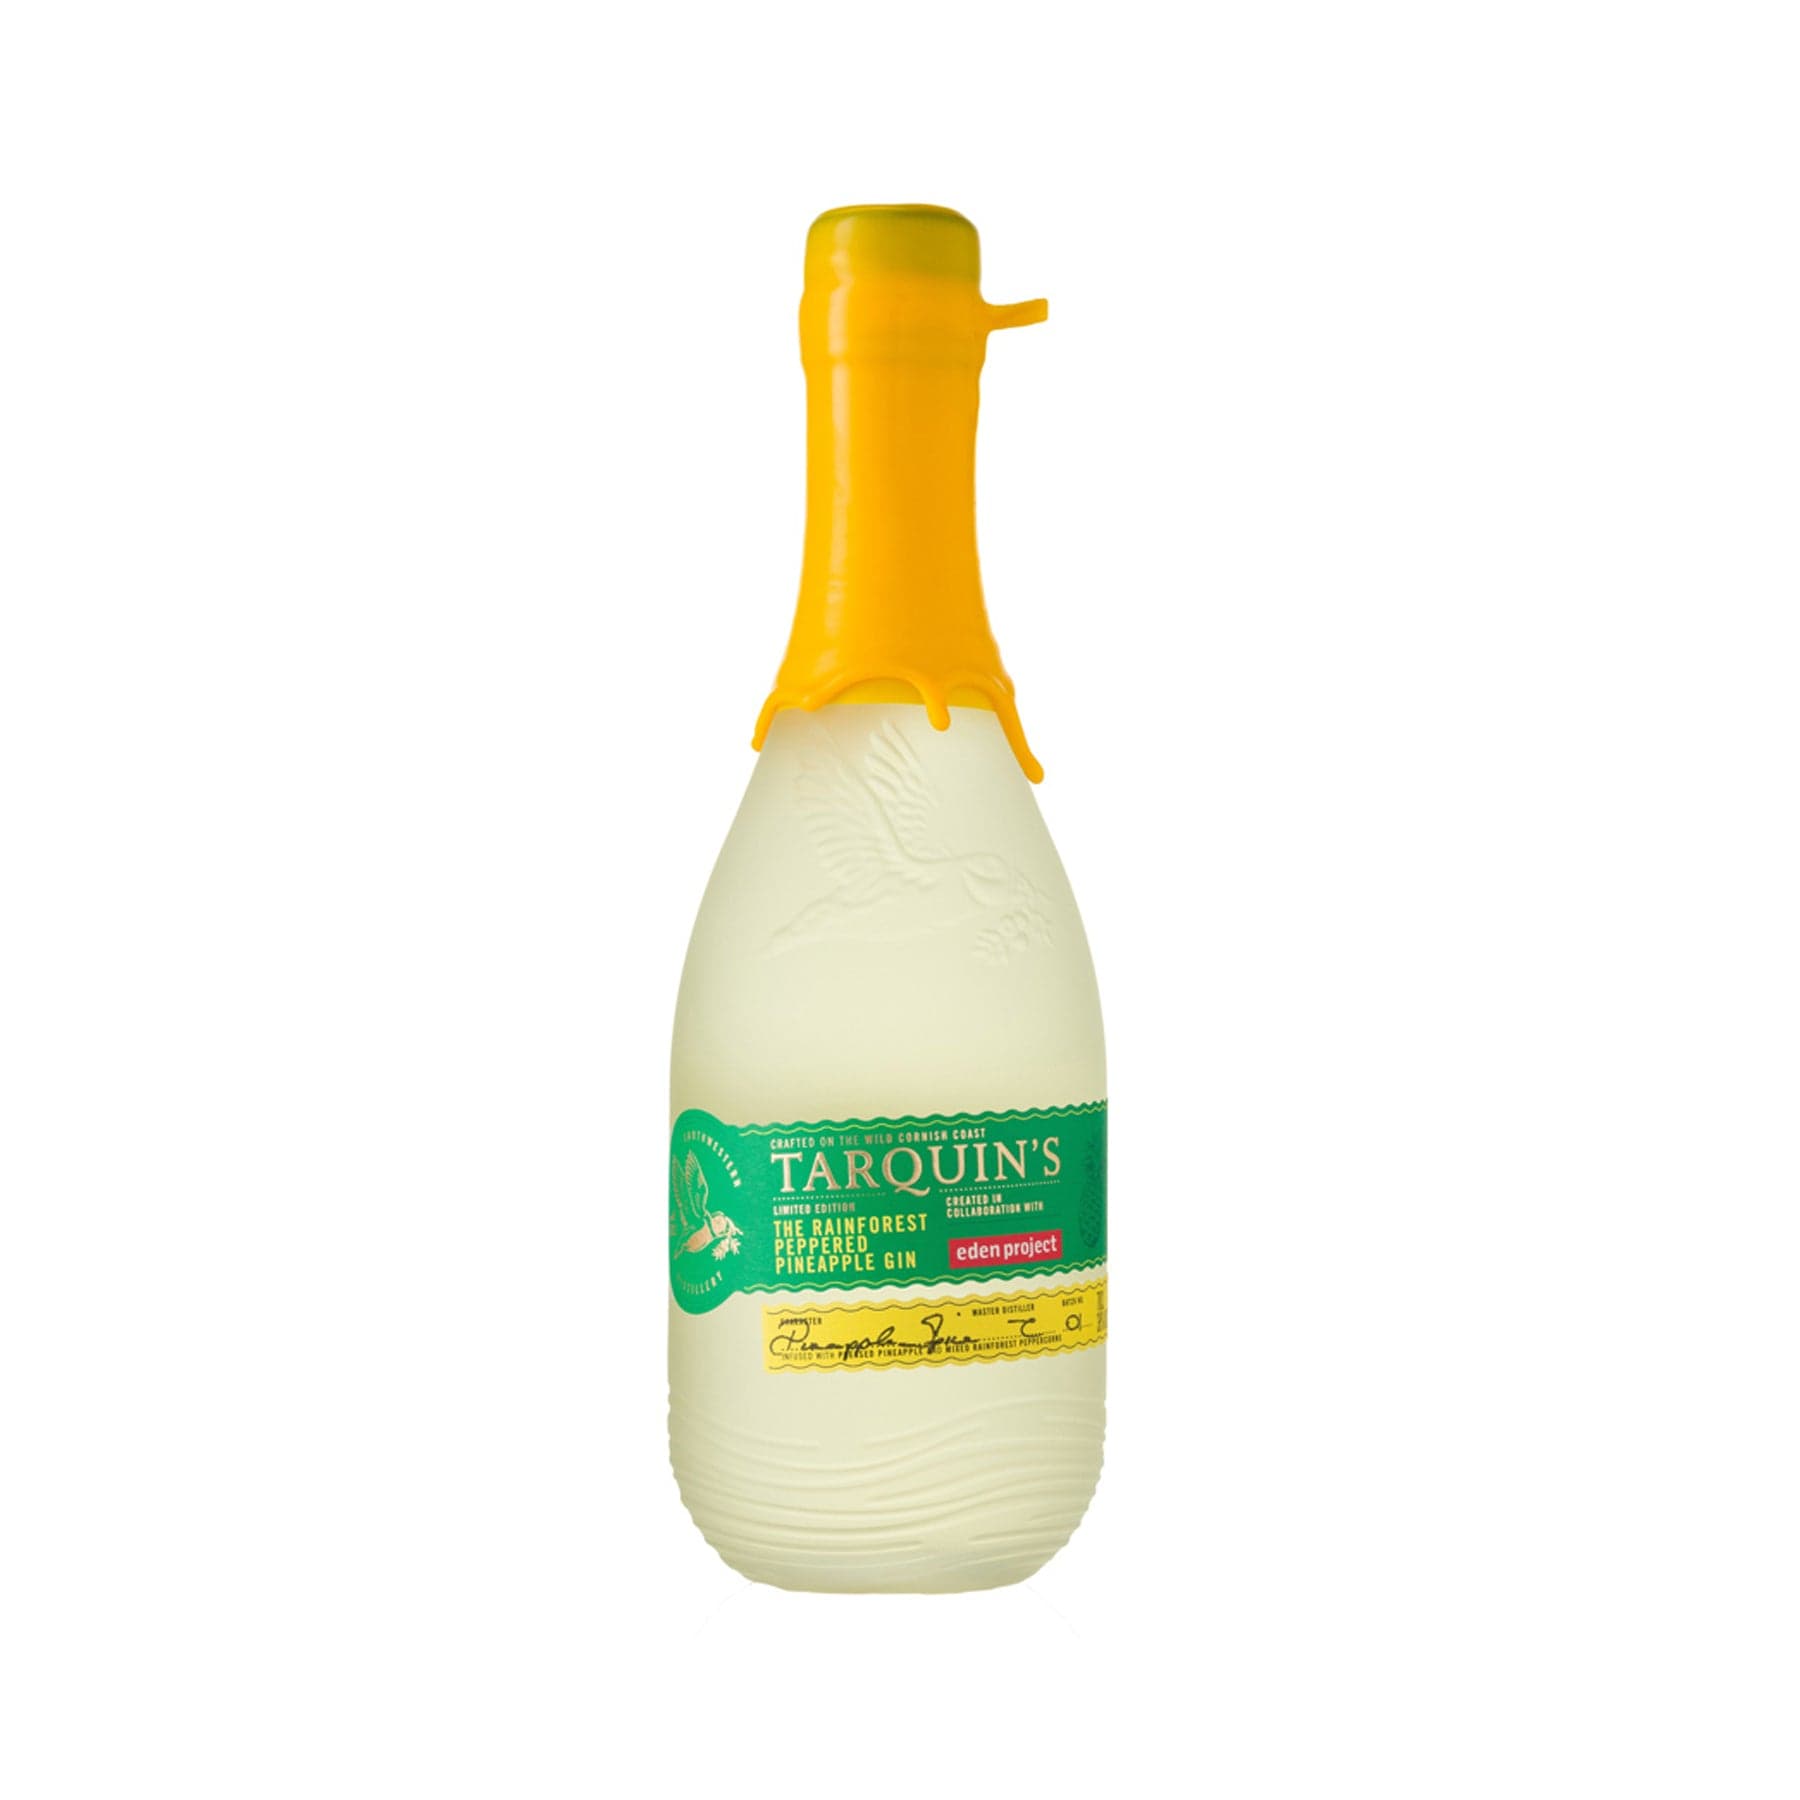 Tarquin's Cornish Gin bottle with yellow cap, Rainforest Edition Pineapple flavored, isolated on a white background